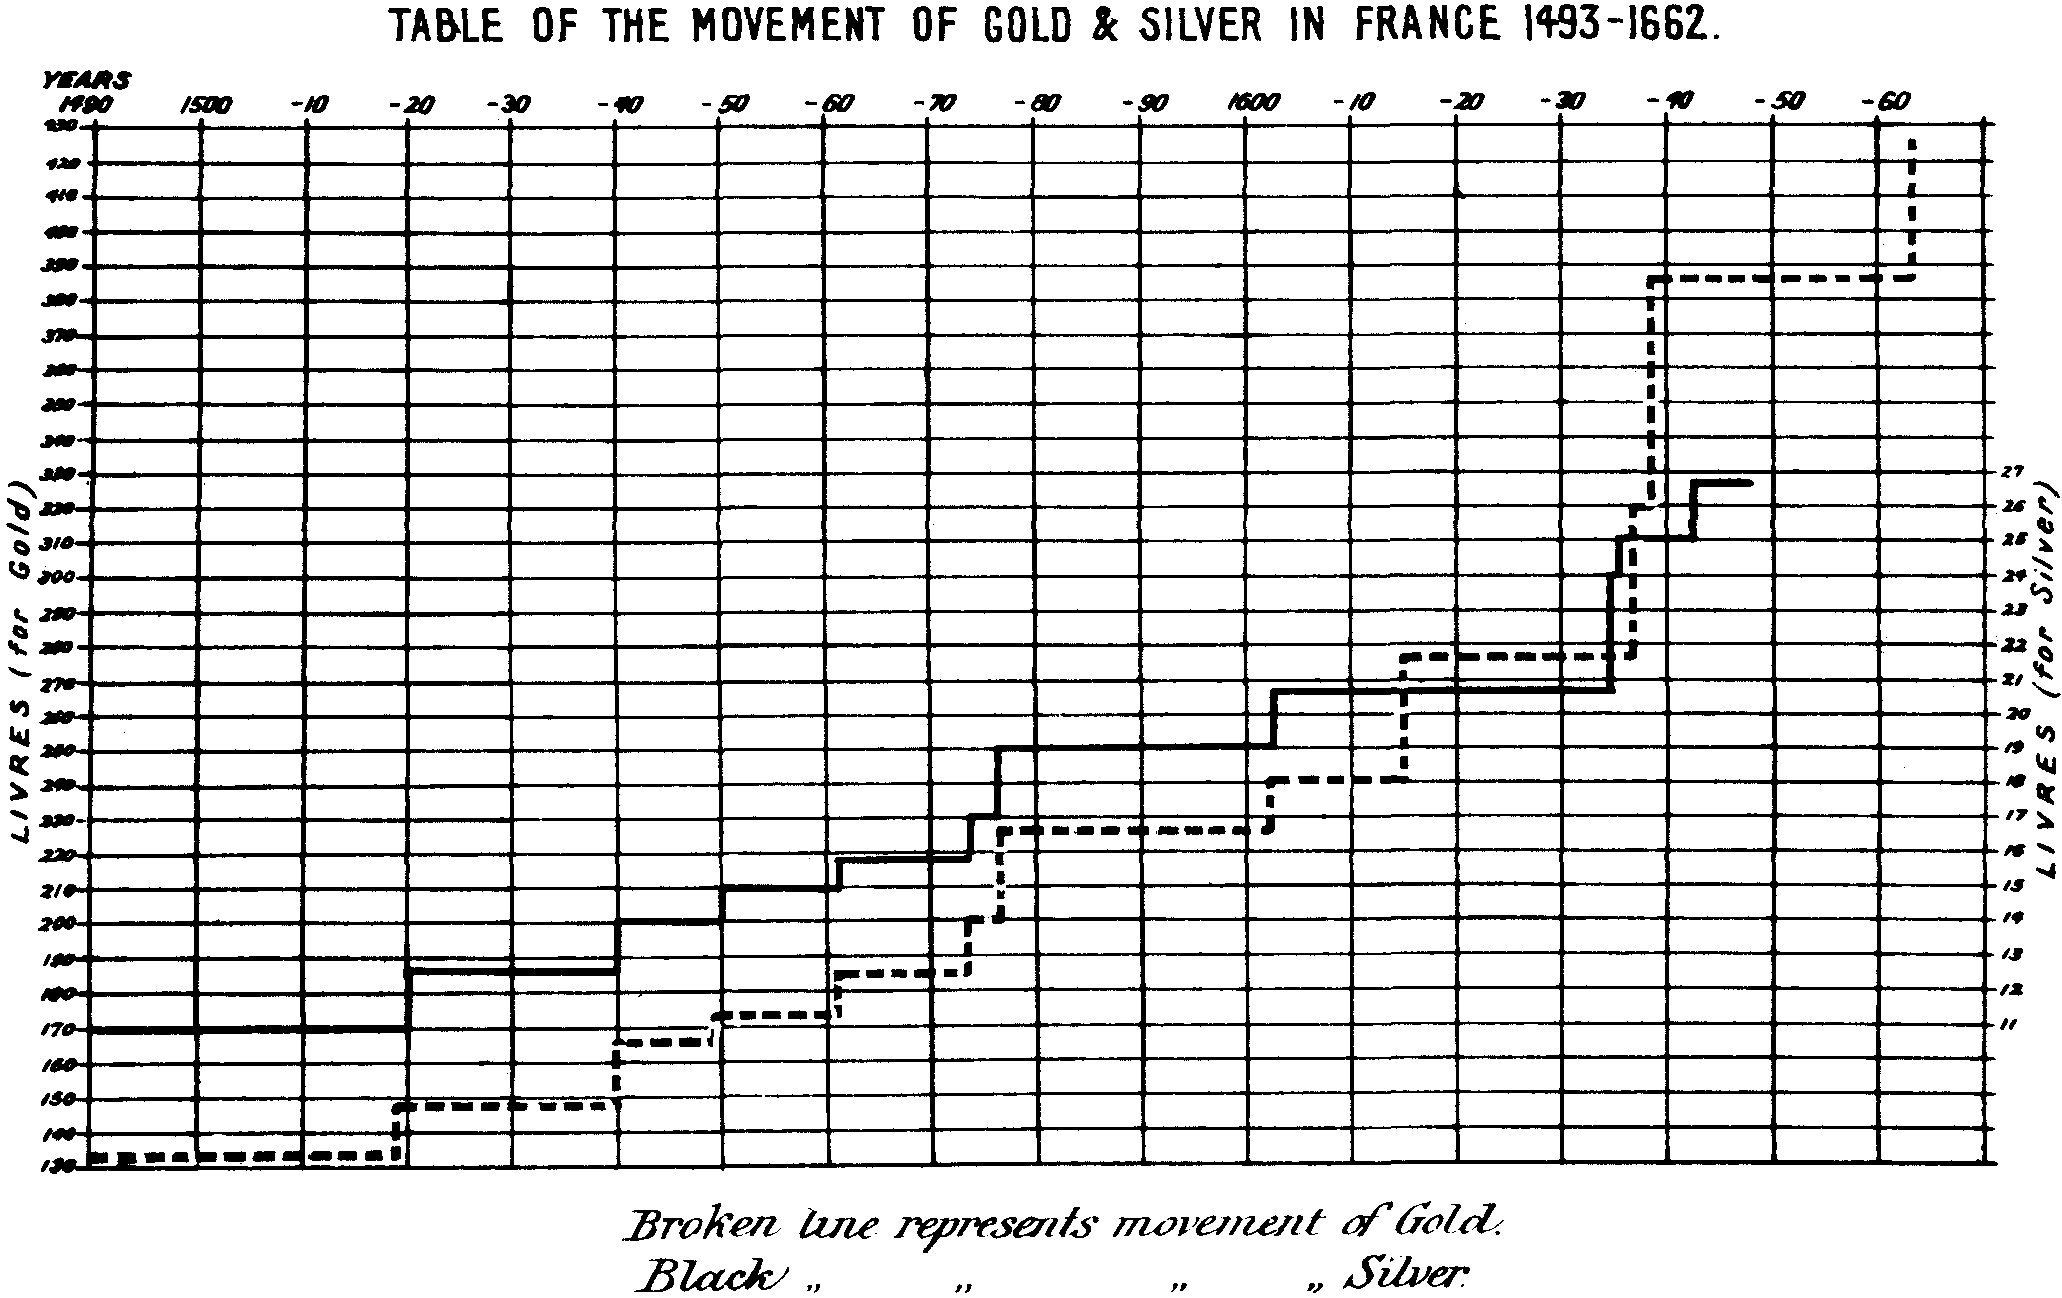 TABLE OF THE MOVEMENT OF GOLD & SILVER IN FRANCE 1493-1662.